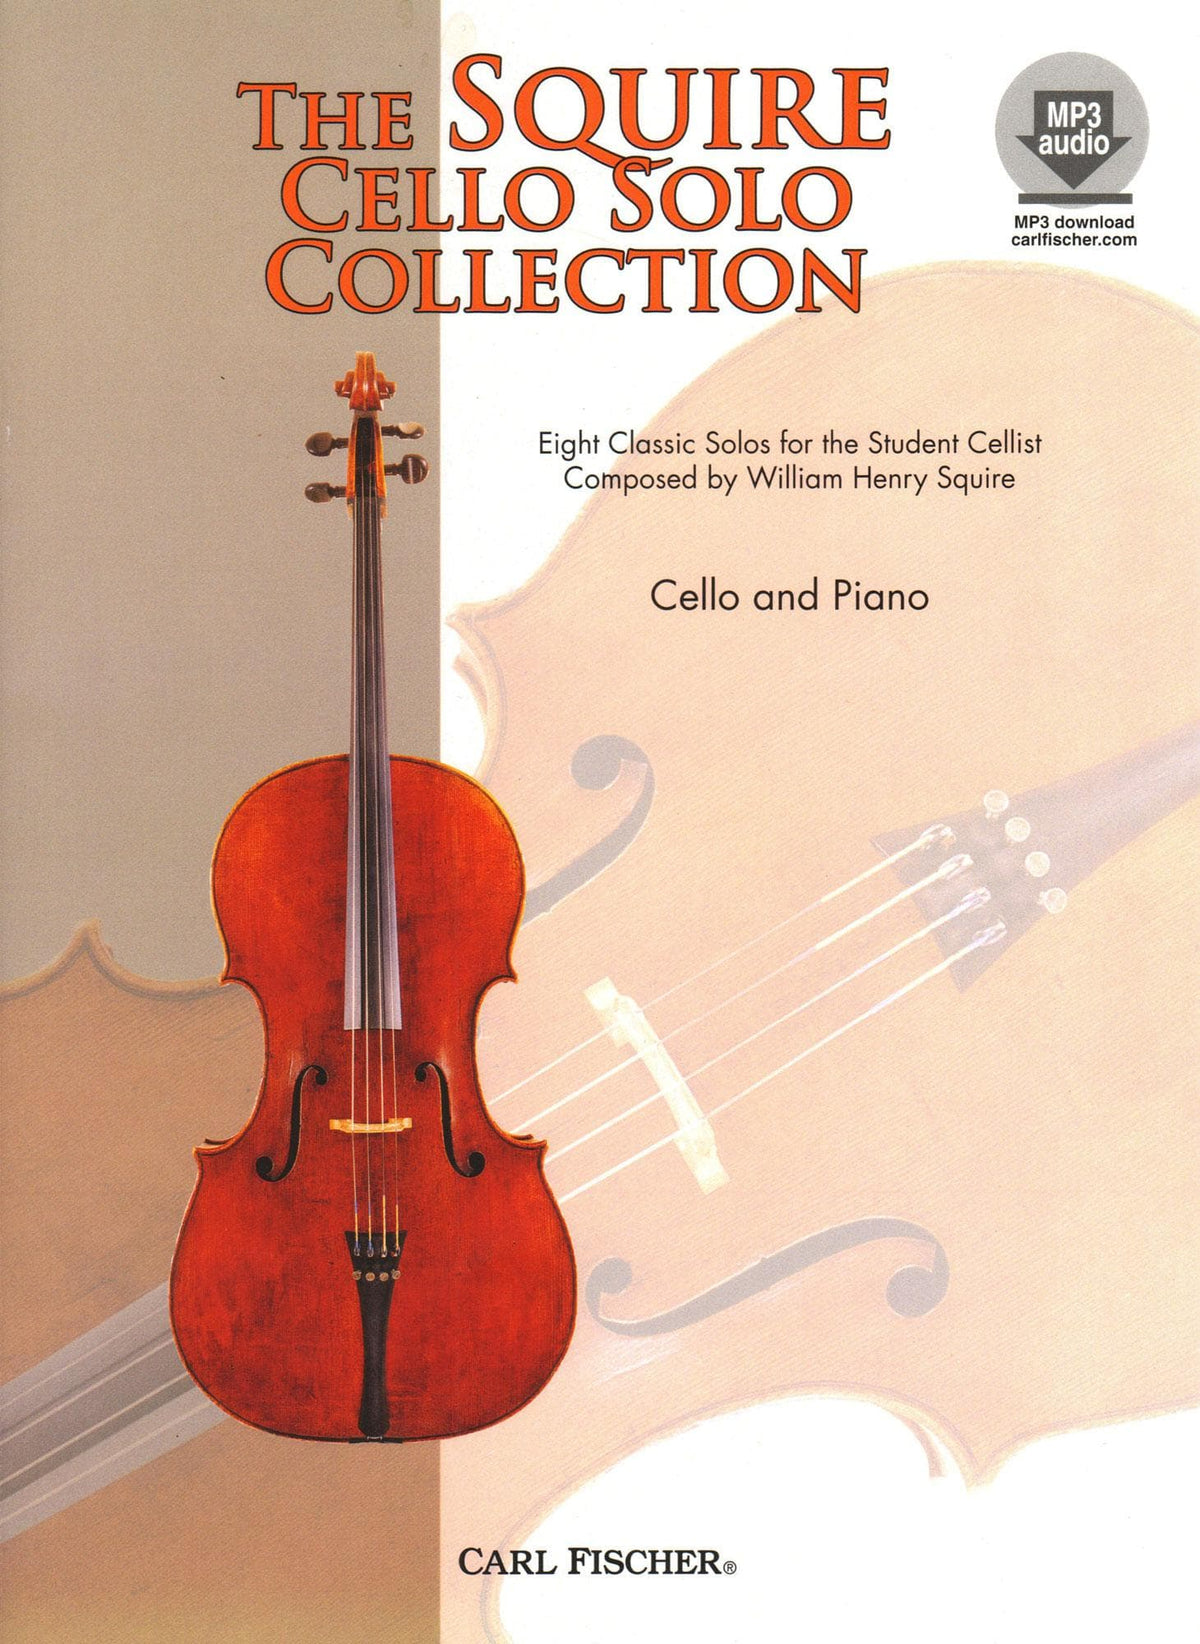 The Squire Cello Solo Collection - 8 Pieces by William Henry Squire - for Cello and Piano or Audio Accompaniment - Carl Fischer